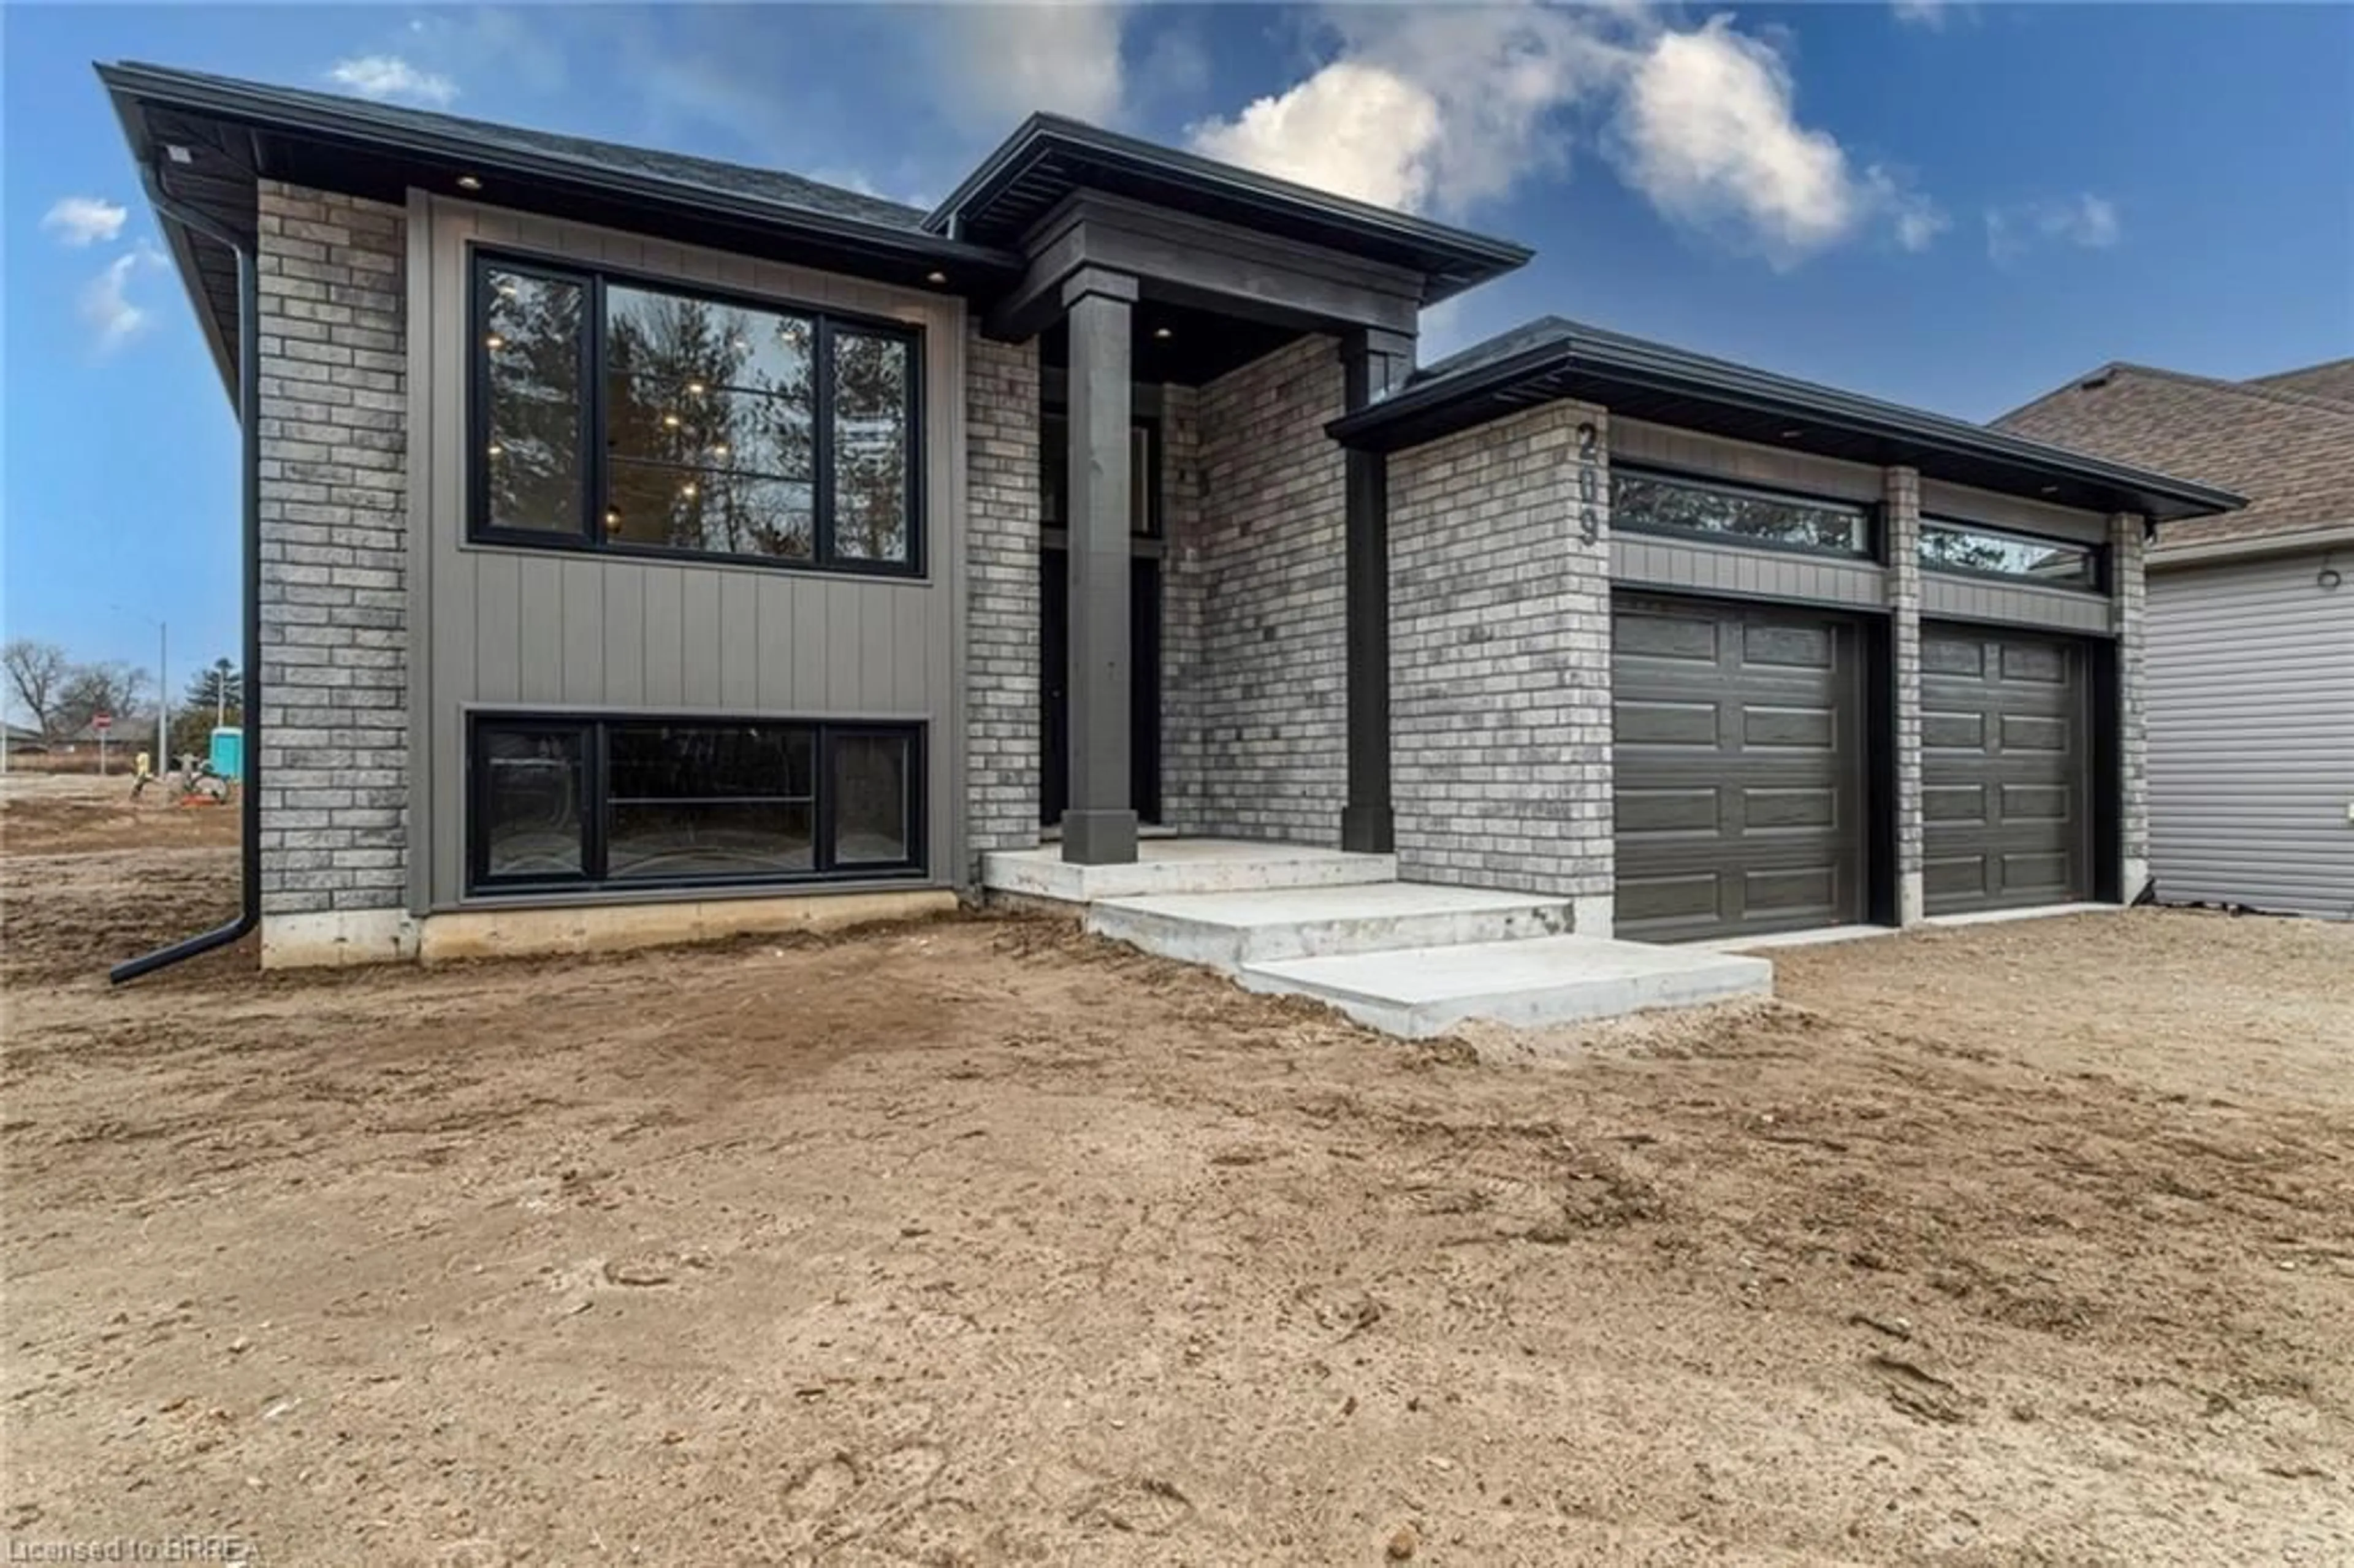 Home with brick exterior material for 33 Vanrooy Trail, Waterford Ontario N0E 1Y0